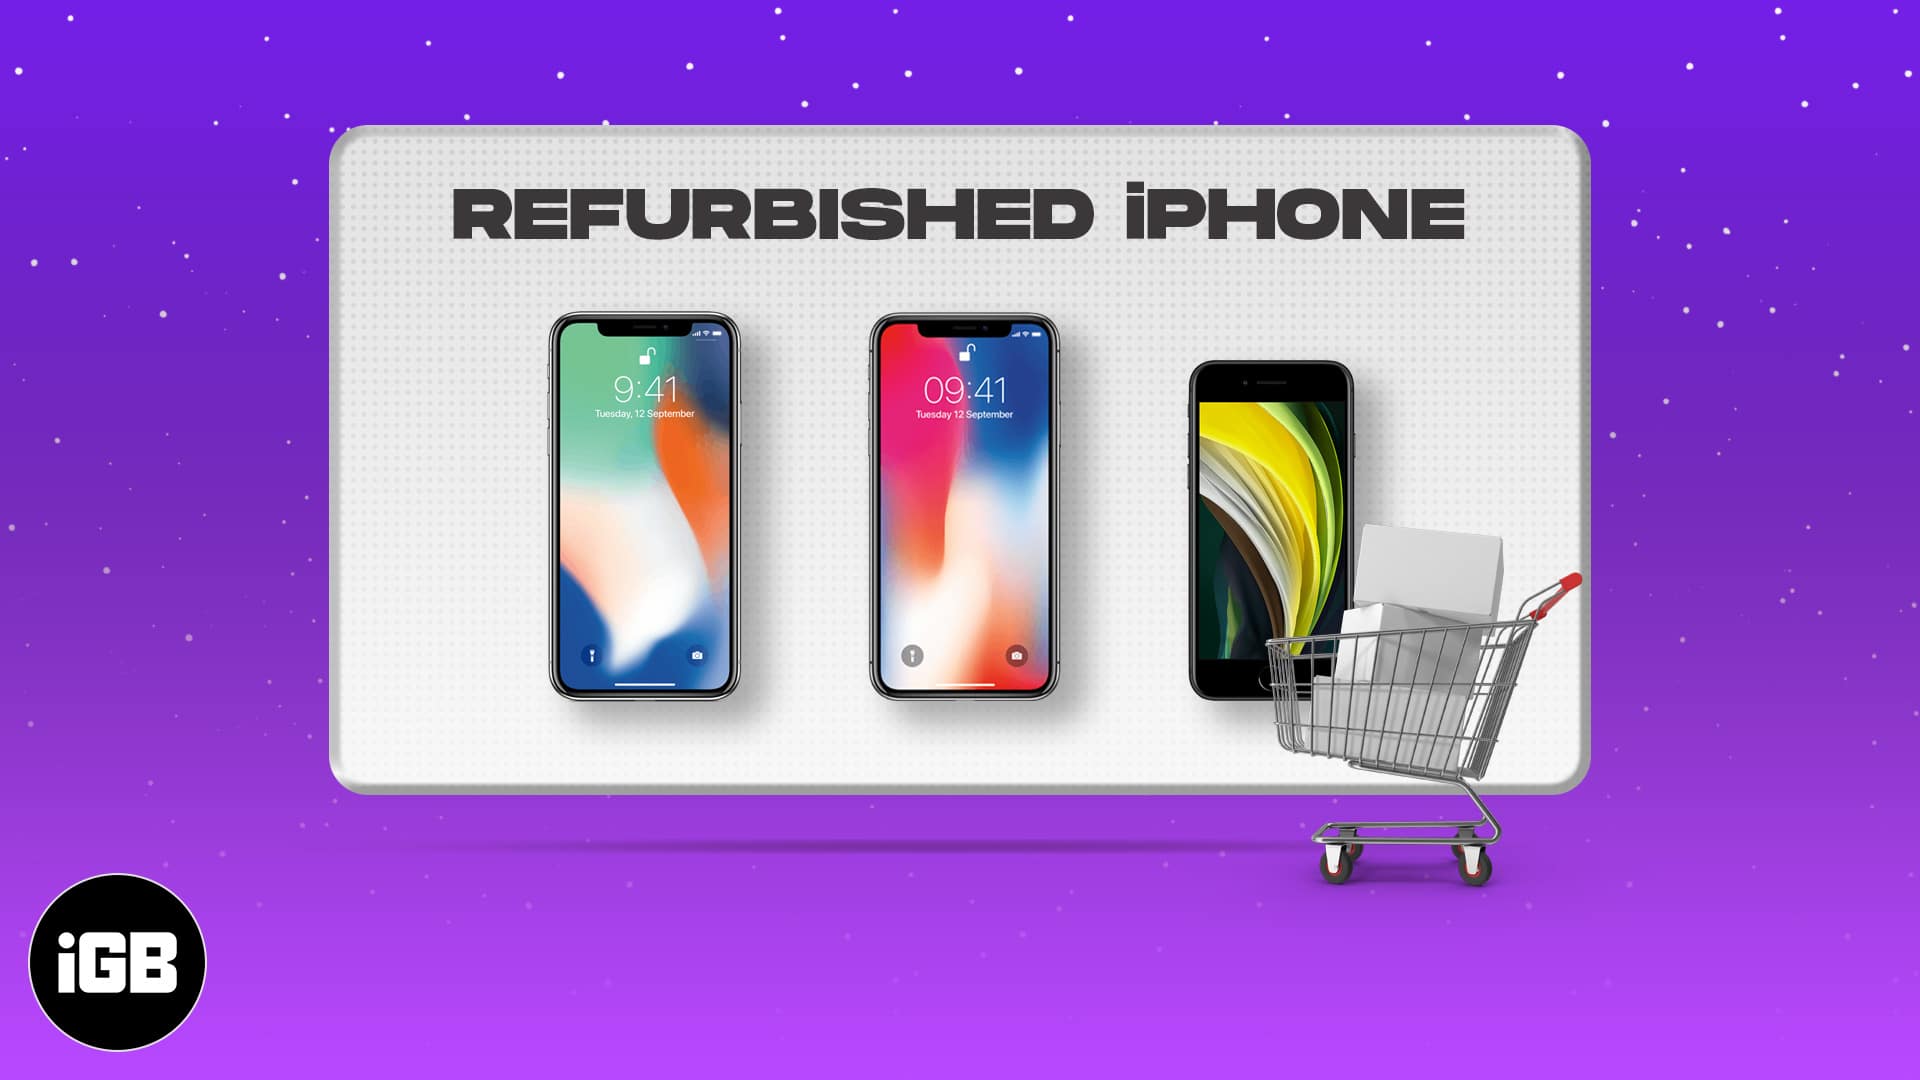 Best places to buy refurbished iPhones